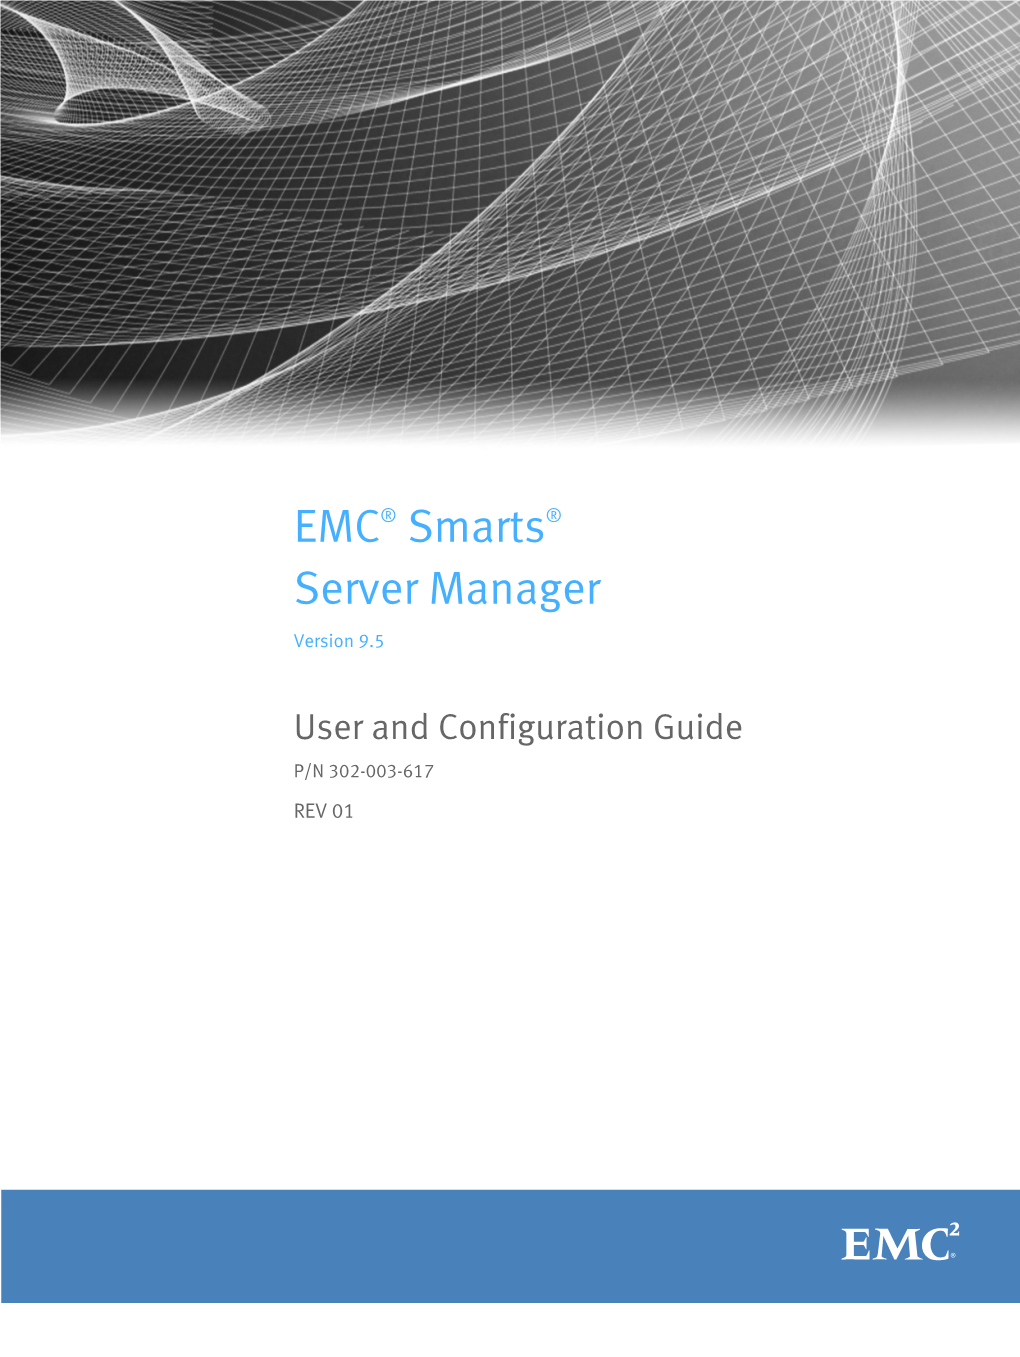 EMC Smarts Server Manager Version 9.5 User and Configuration Guide